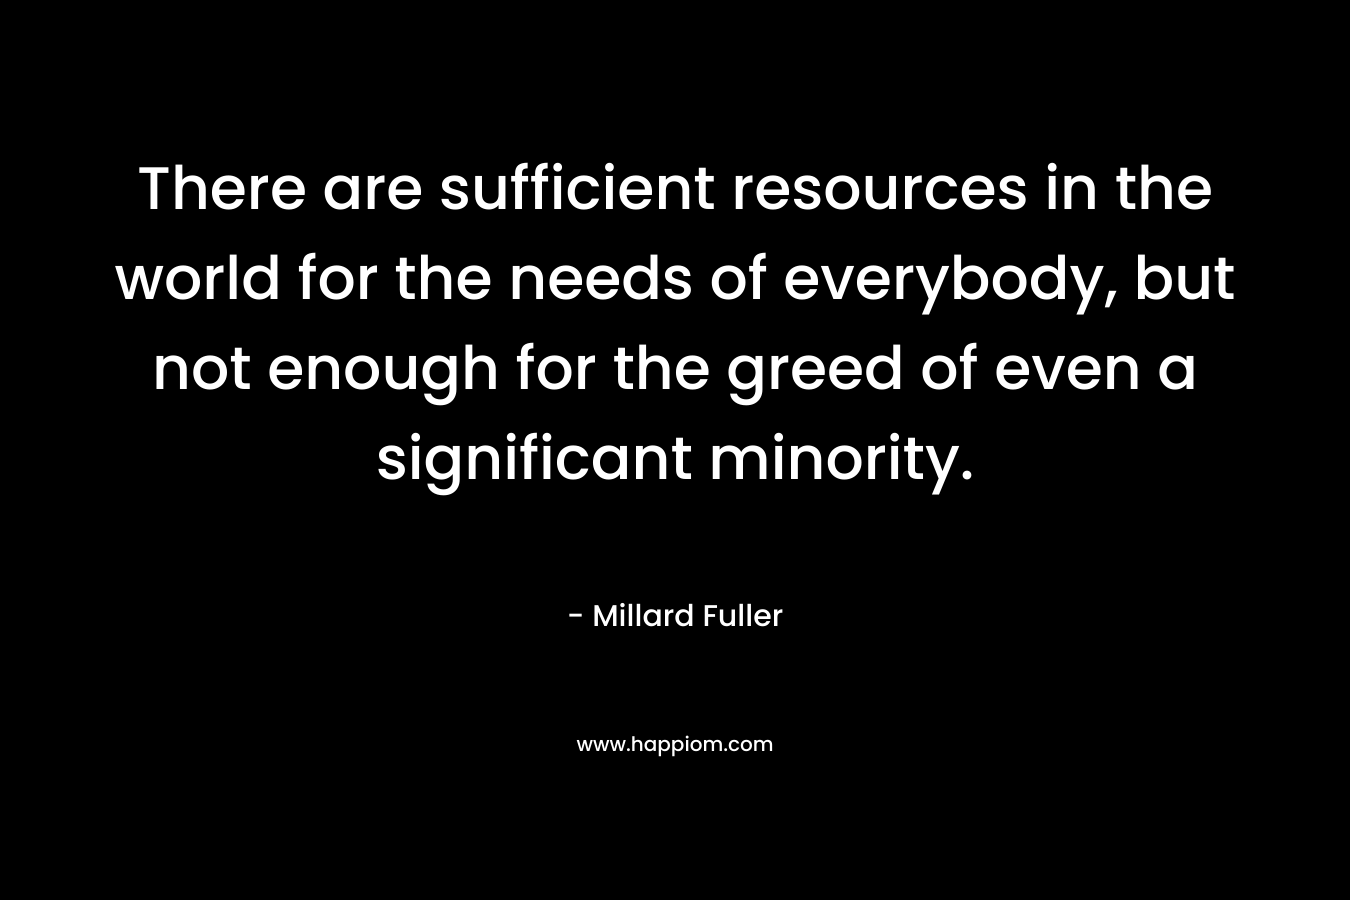 There are sufficient resources in the world for the needs of everybody, but not enough for the greed of even a significant minority. – Millard Fuller